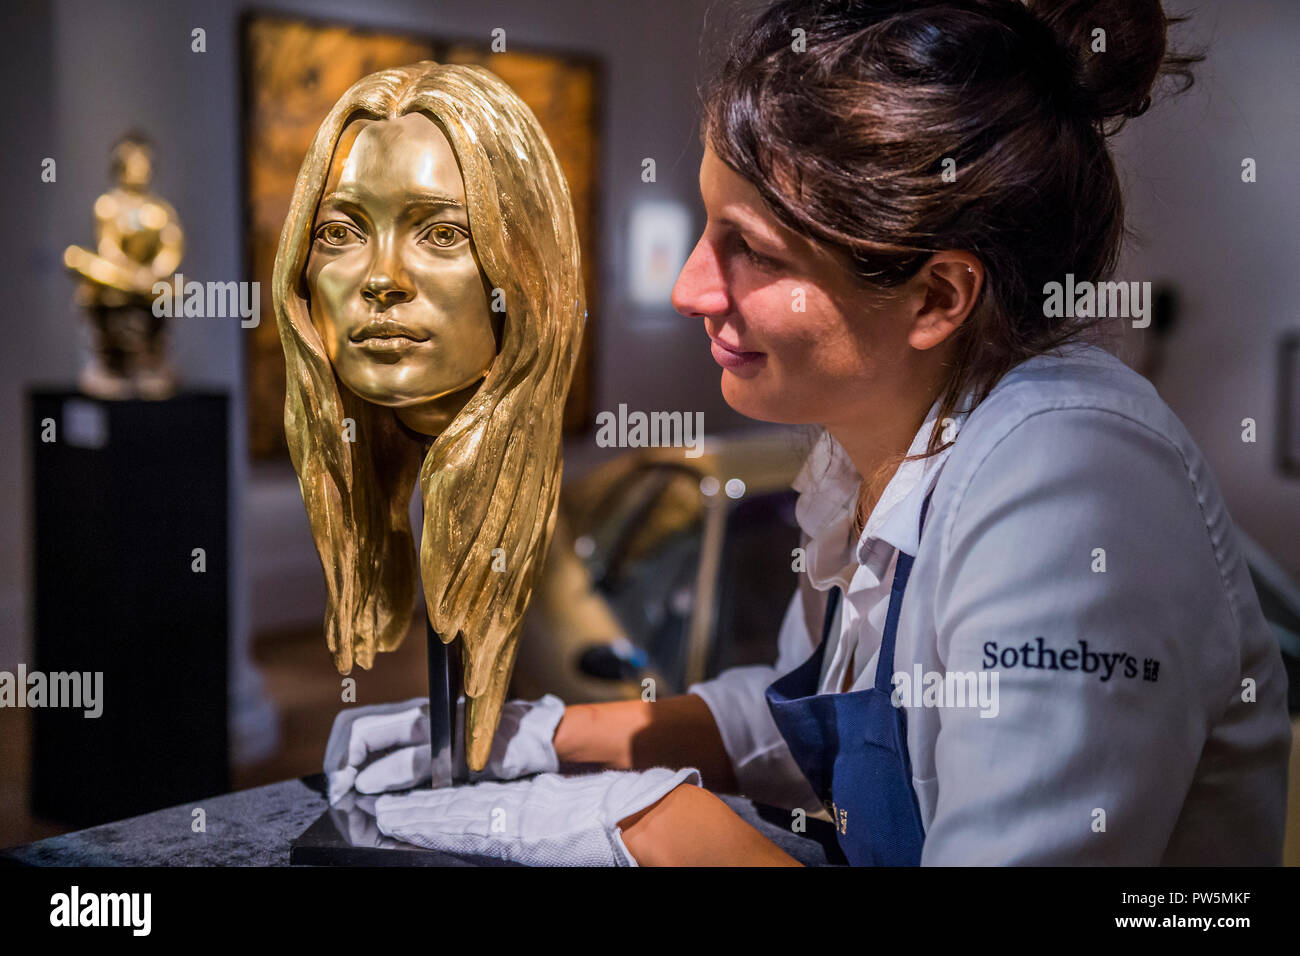 London, UK. 12th Oct 2018. A bust of Kate Moss in solid 18-carat gold by Marc Quinn, est £300-400,000 - The Midas Touch, a preview of a forthcoming sale dedicated entirely to Gold, at Sotheby’s New Bond Street, London.. Credit: Guy Bell/Alamy Live News Stock Photo